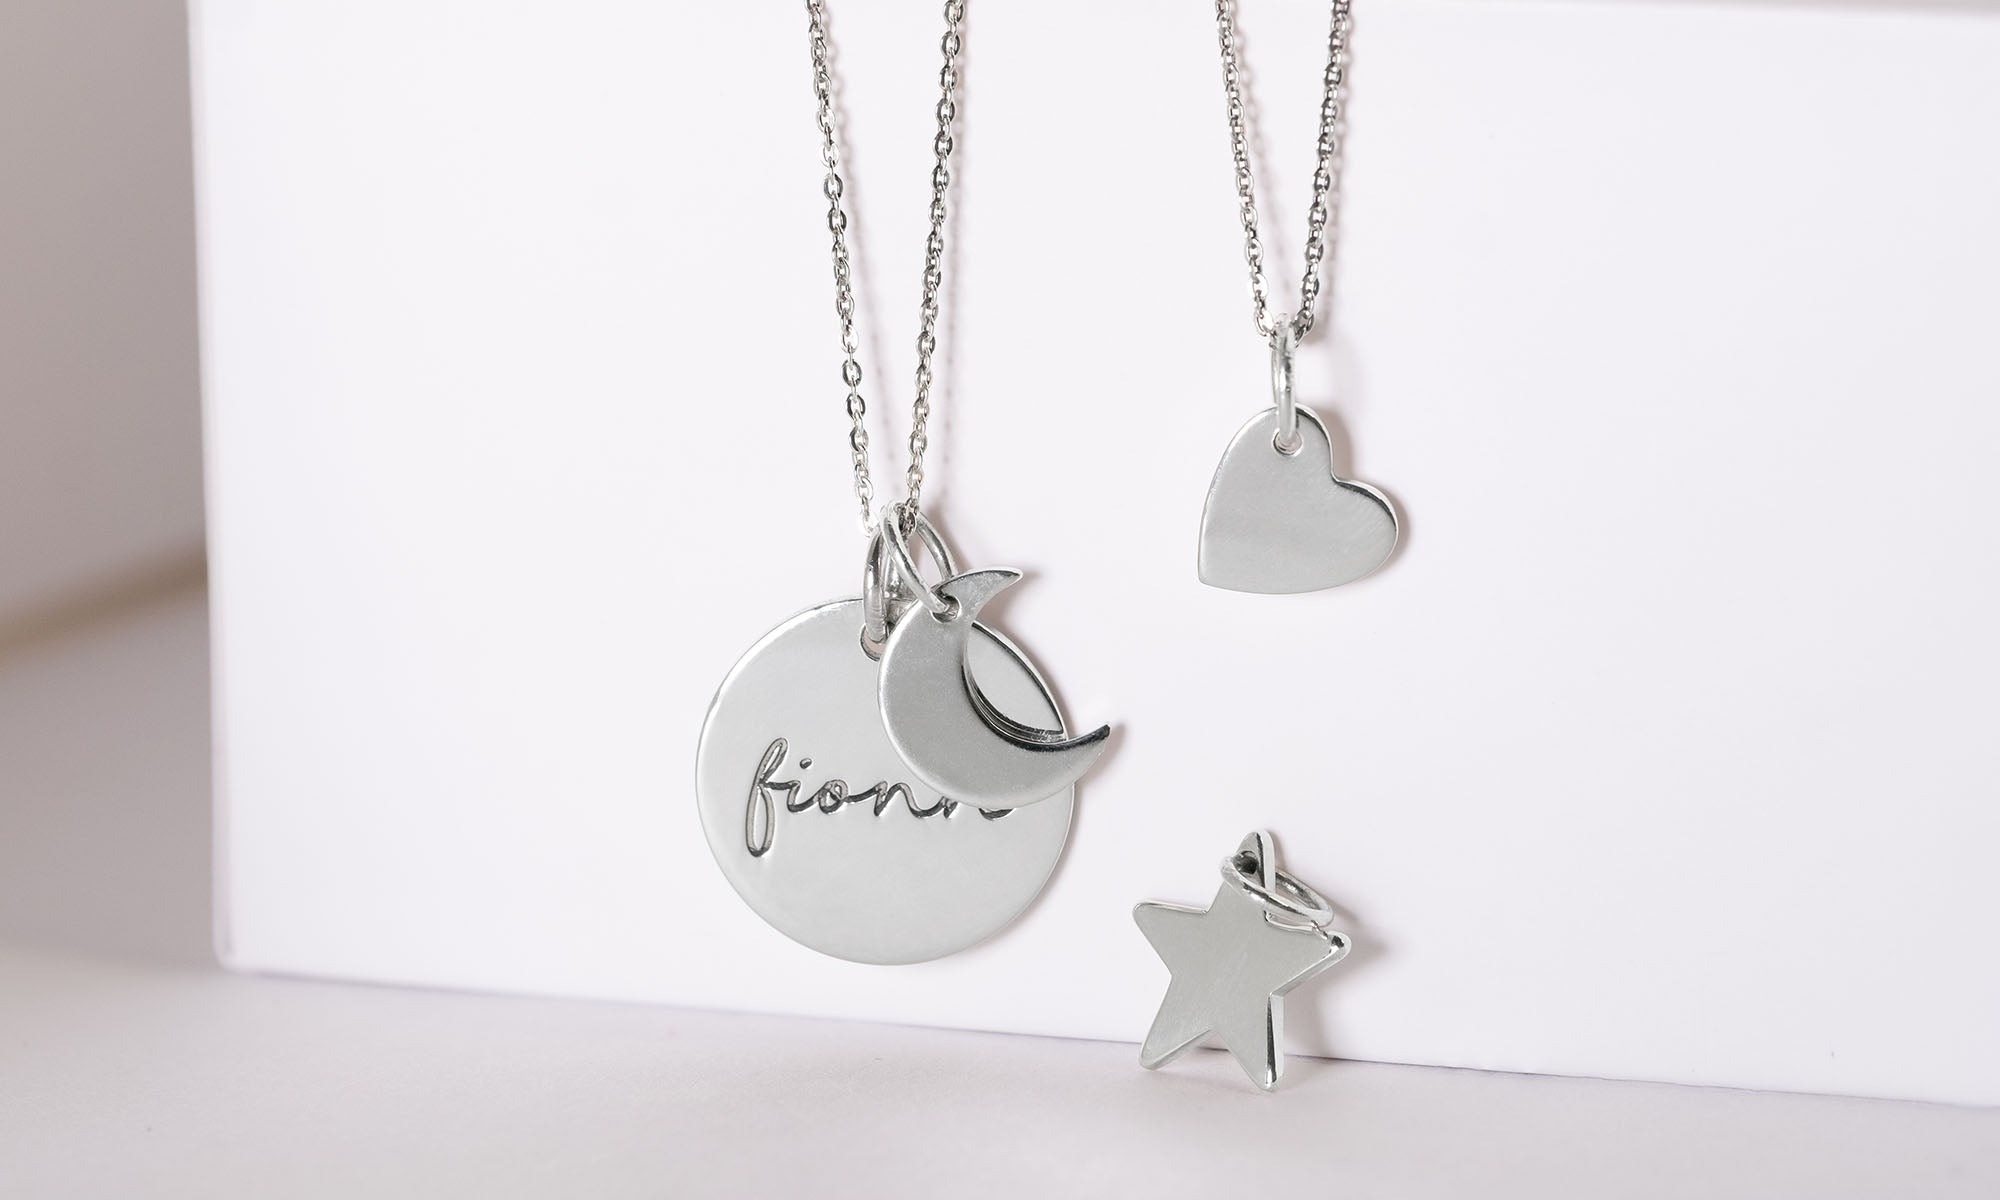 Silver disc necklace and charms